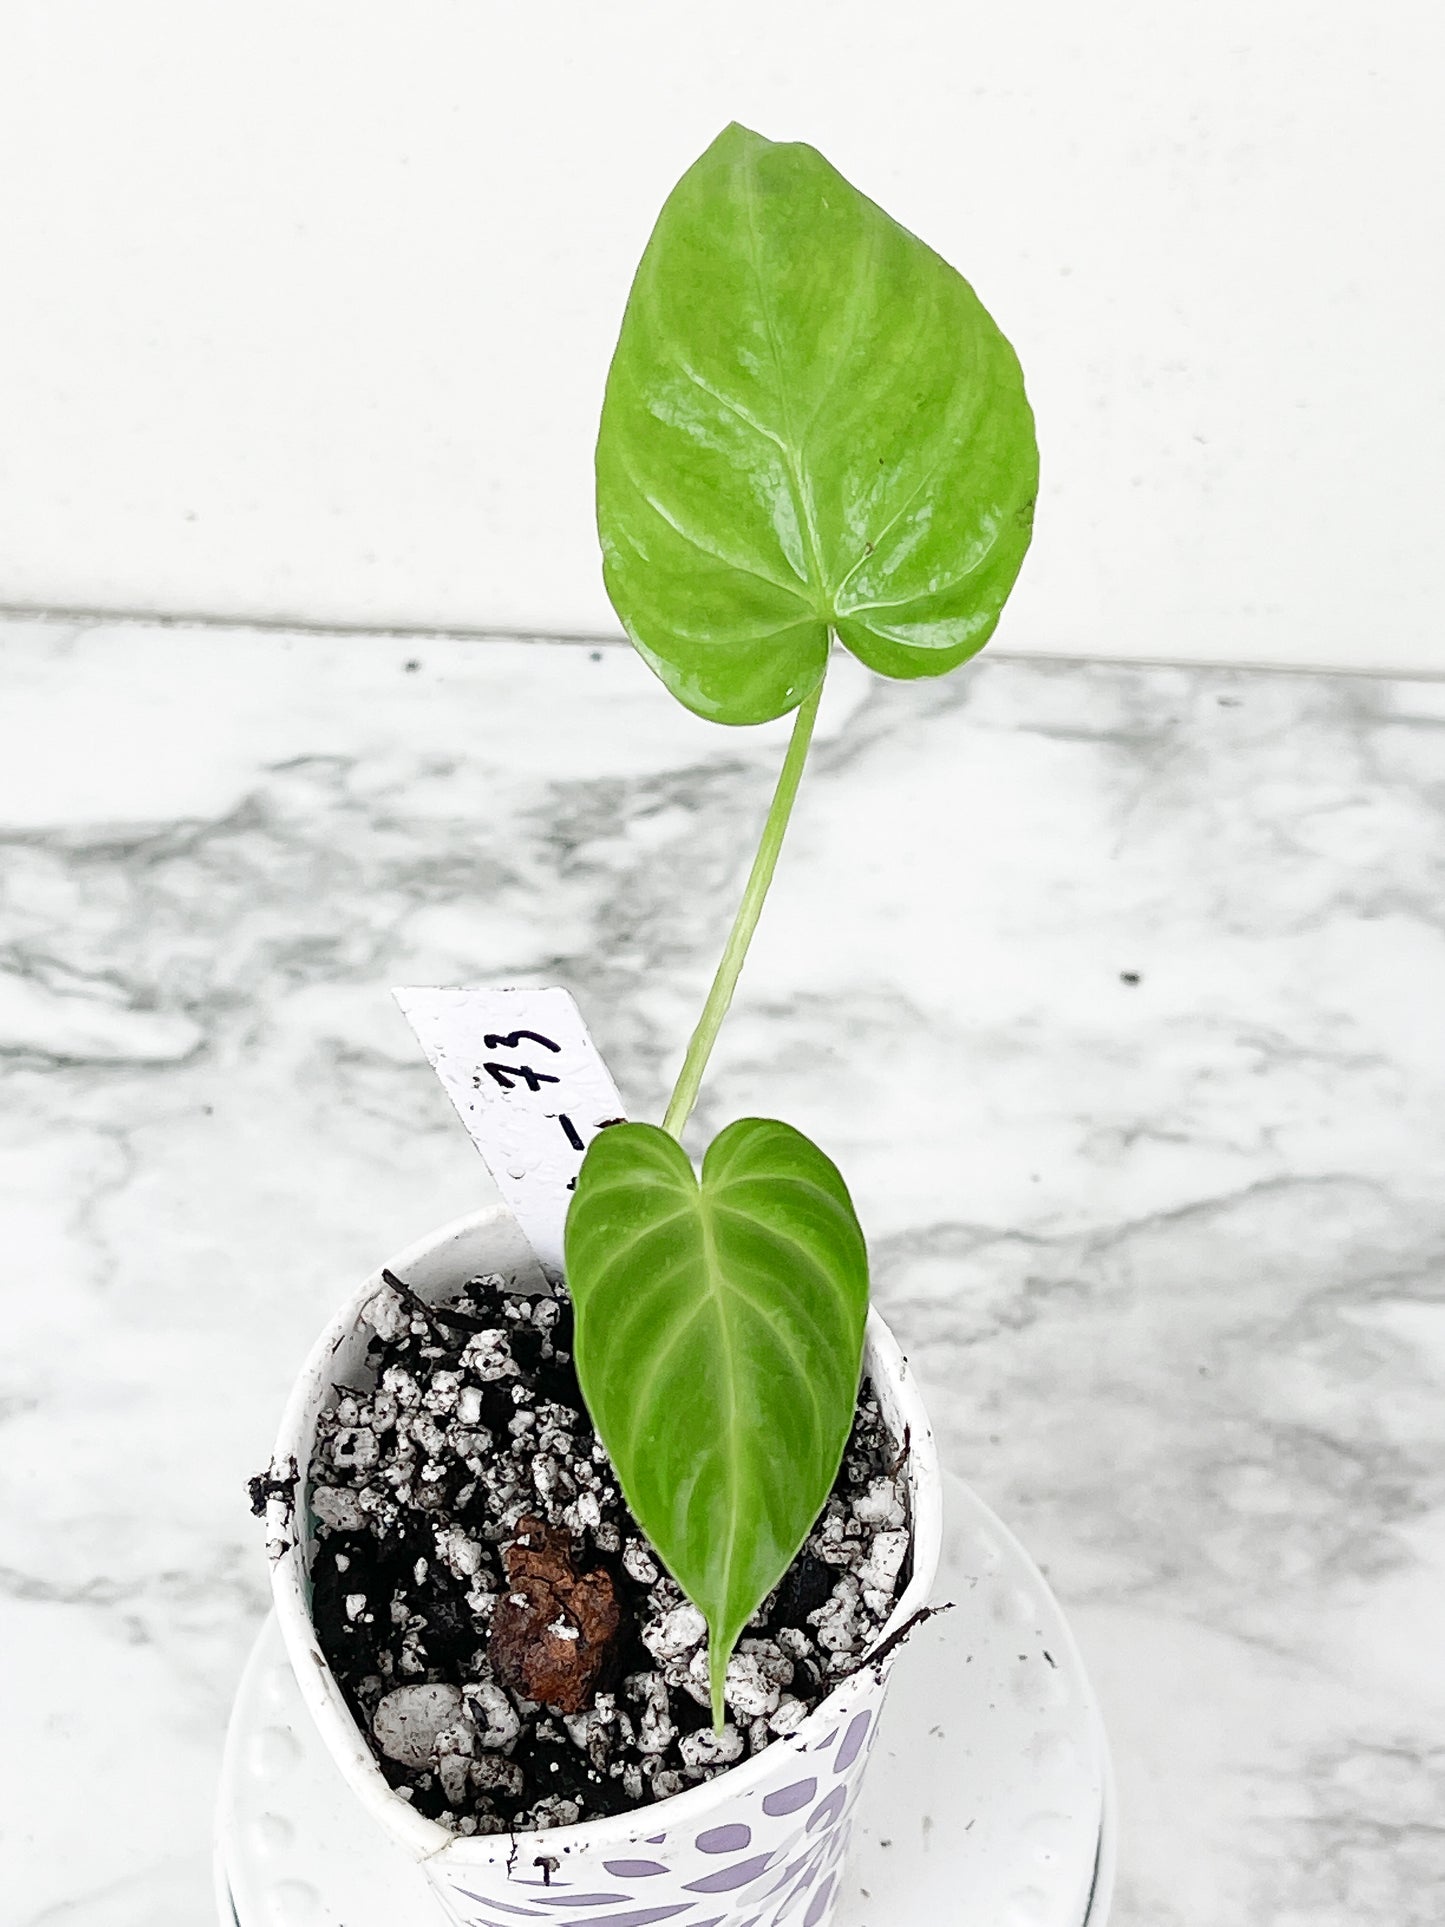 Philodendron Verrucosum Seedling Rooted. 3 leaves